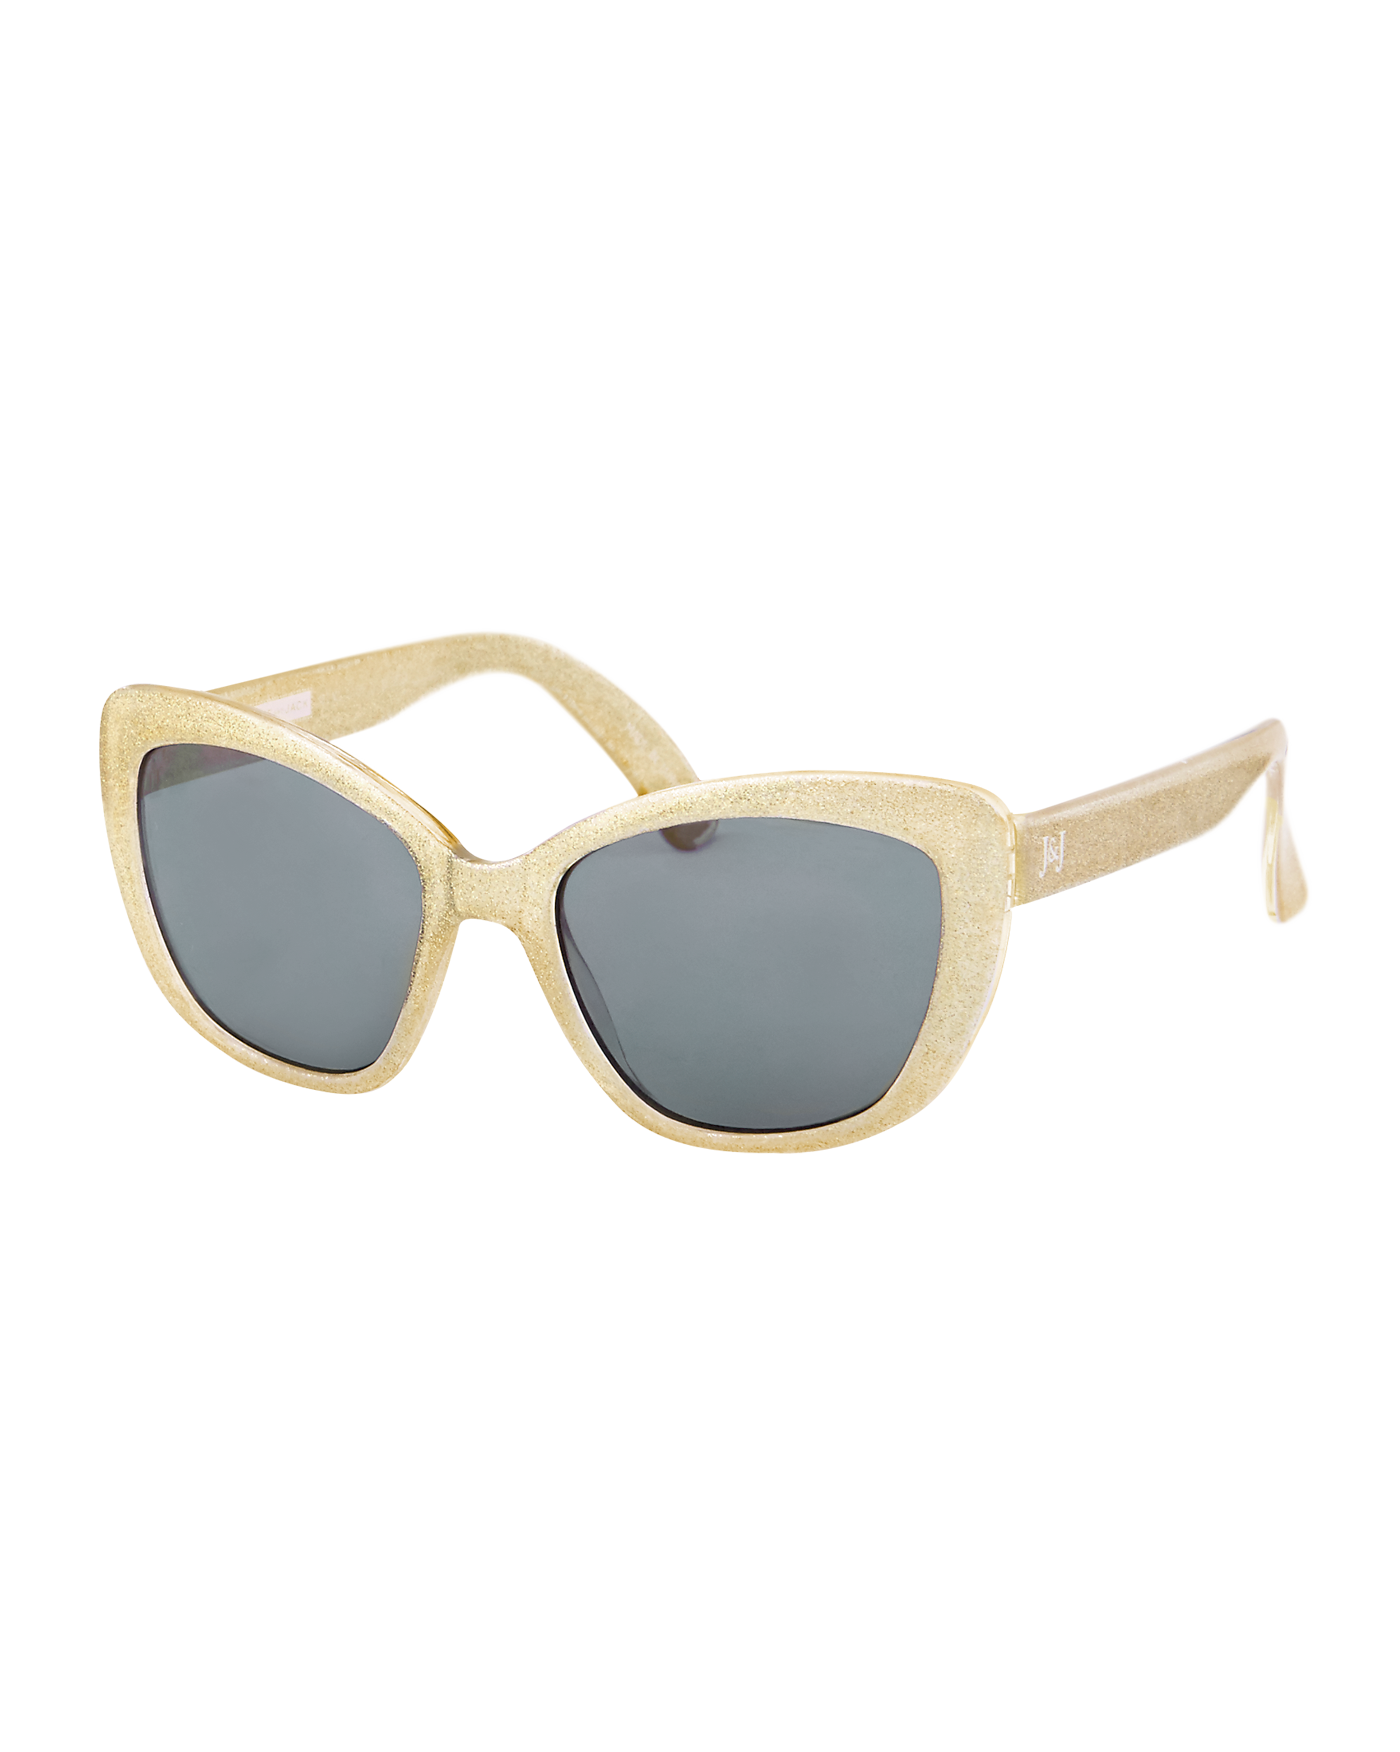 Gold Shimmer Sunglasses by Janie and Jack